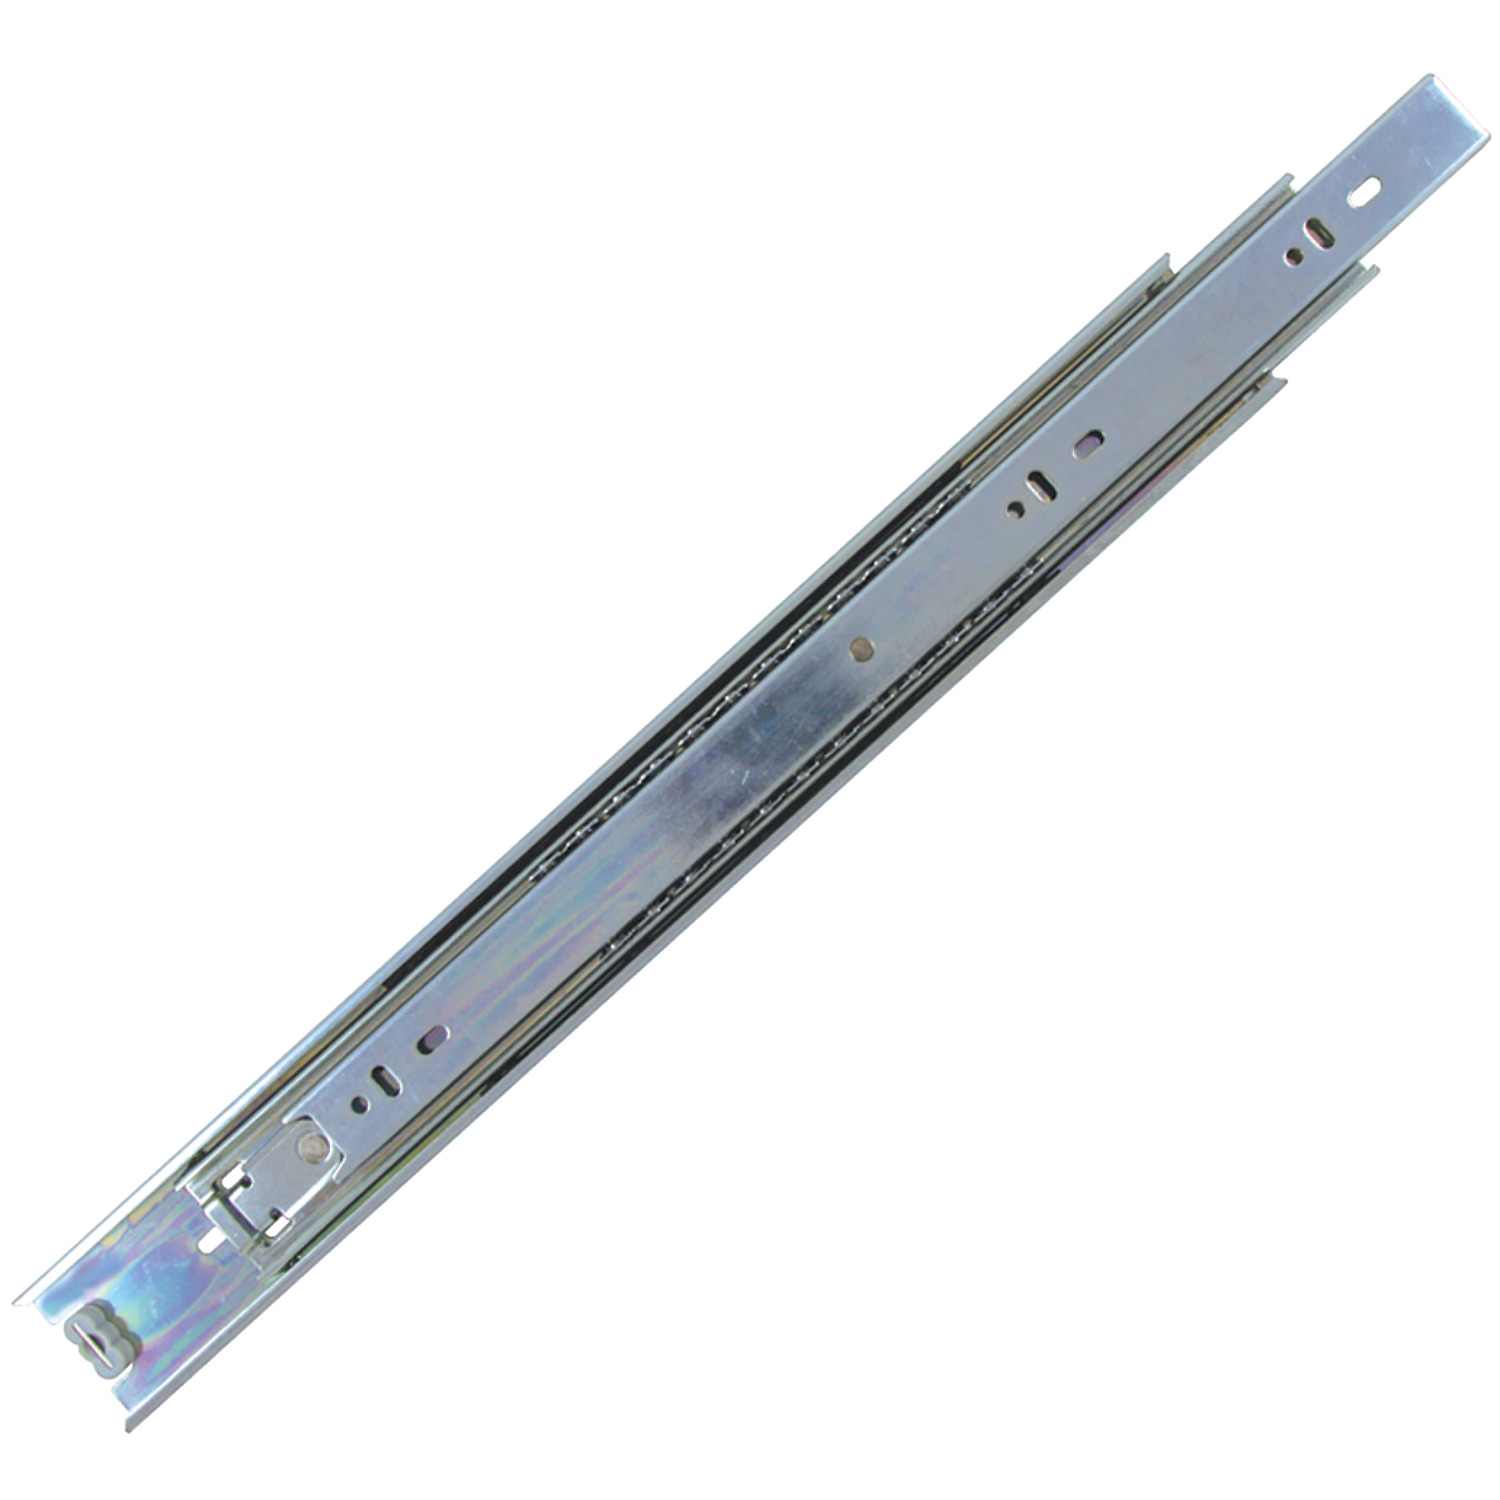 P5100.AC0500 Drawer Slide Full Extn Length 500; Load 45kg per pair. Sold Individually. Lever Disconnect; Positive Lock